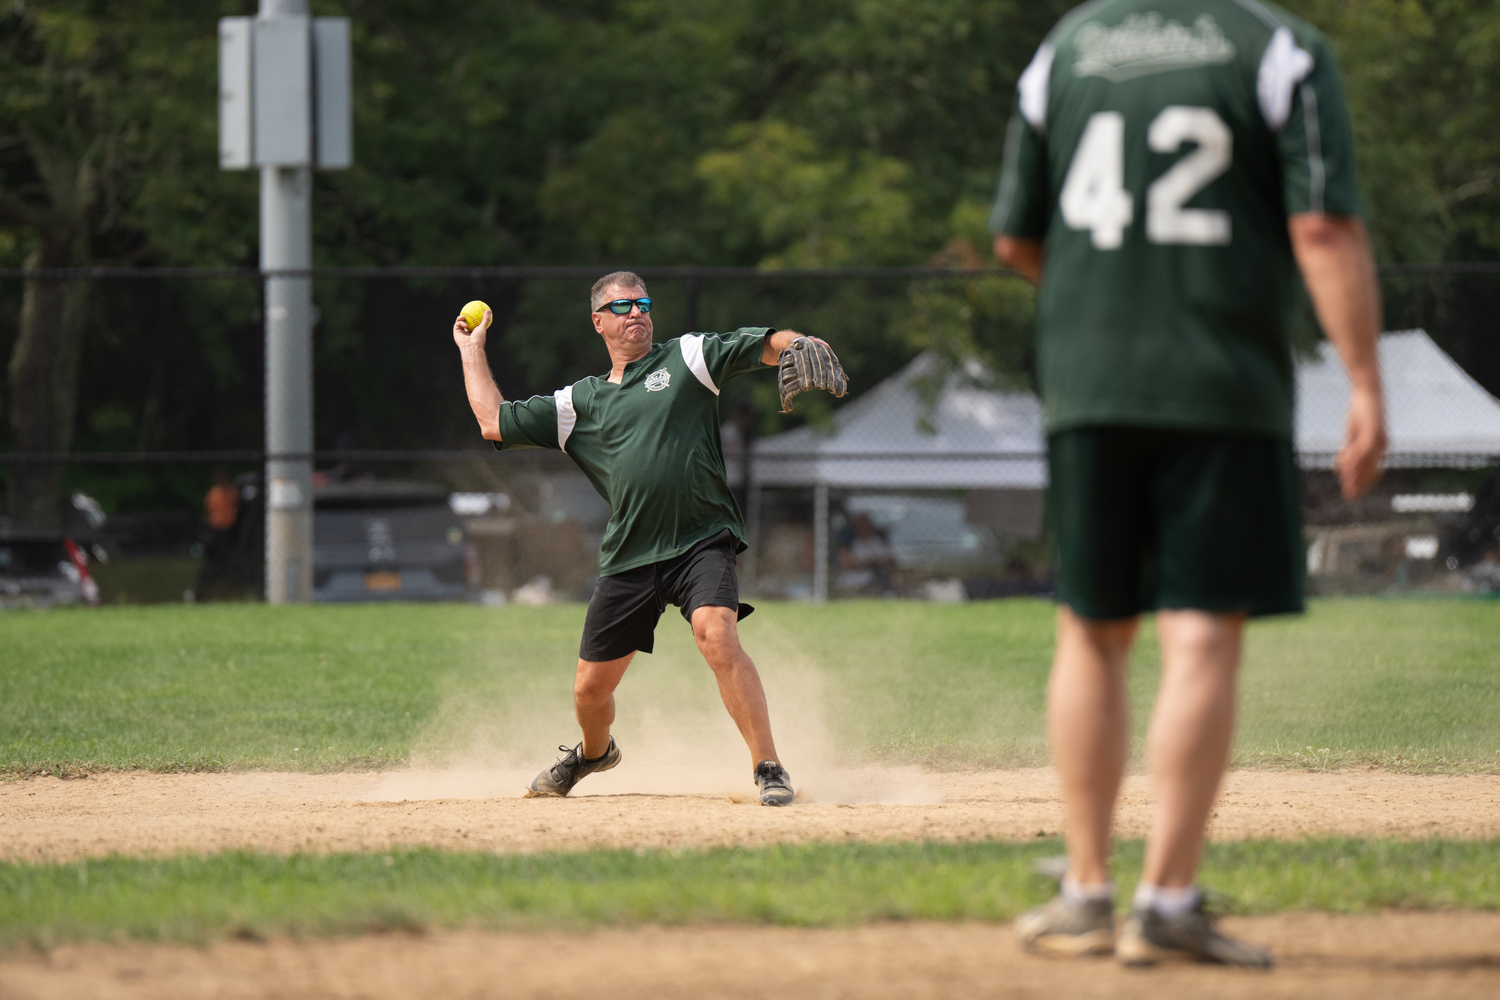 Anthony Dragone fires the ball to first base. RON ESPOSITO